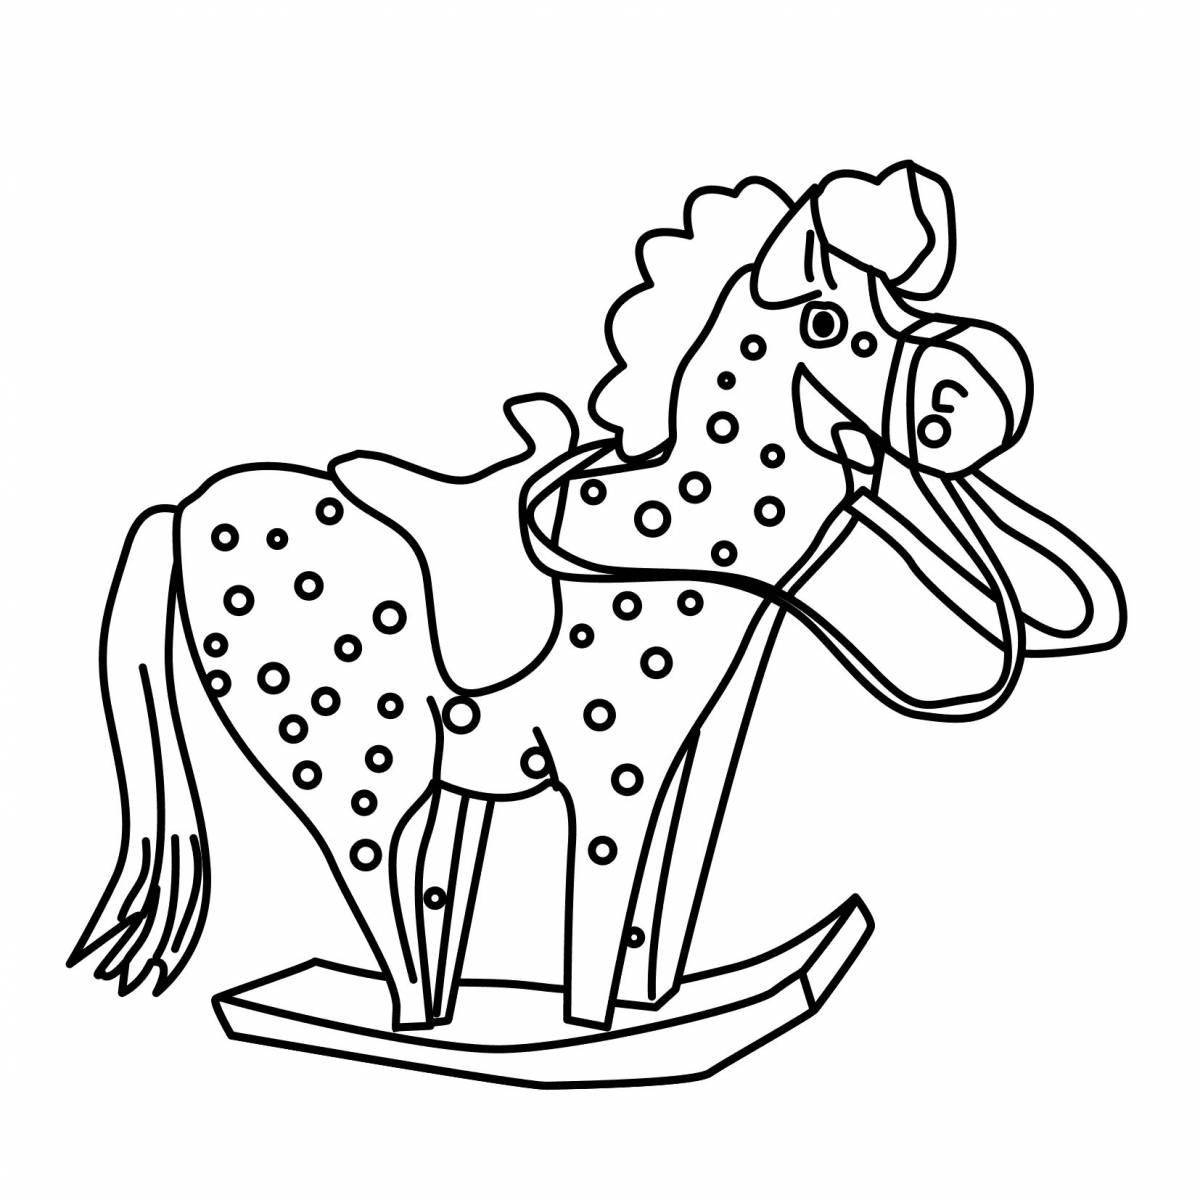 Playful rocking horse coloring for preschoolers